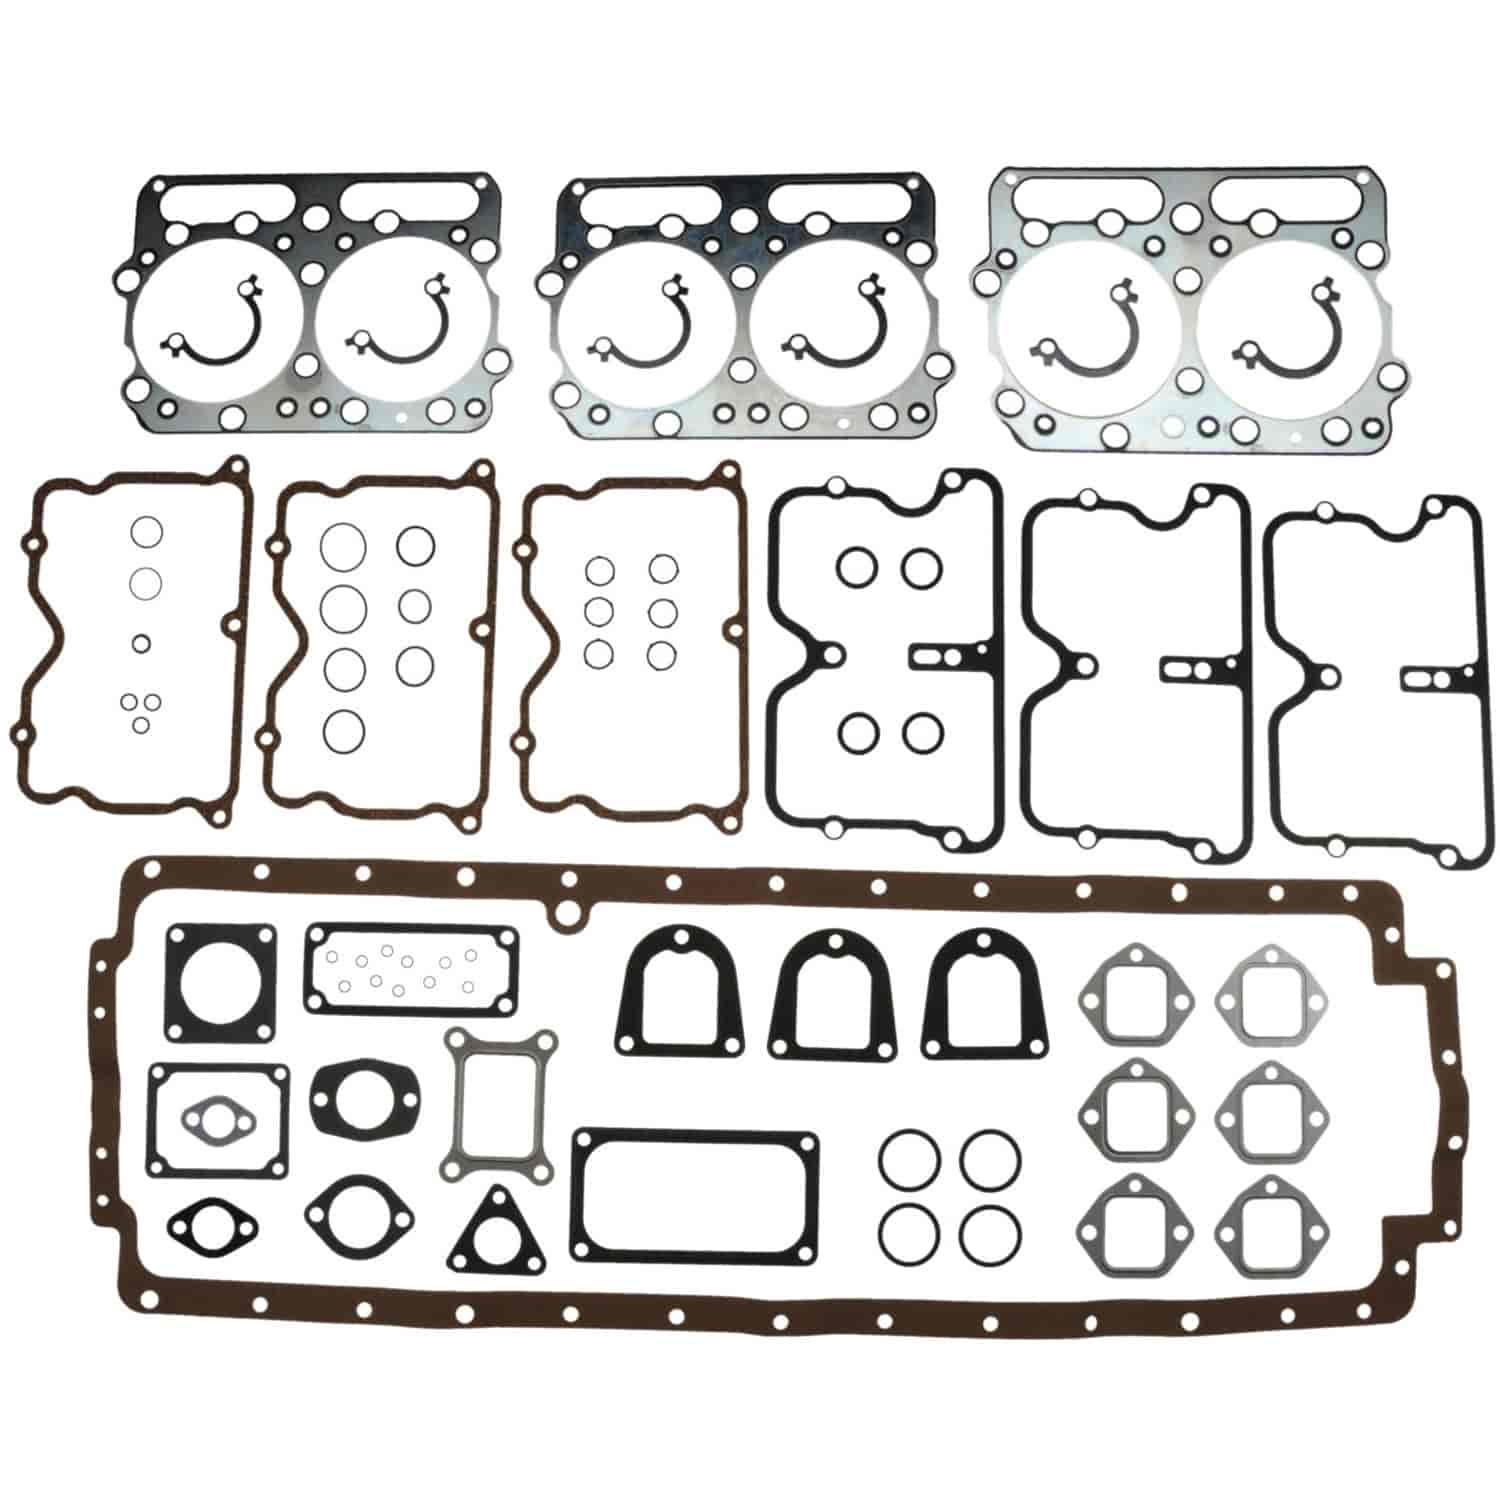 In-Frame Overhaul Set for Cummins 855 Series Small